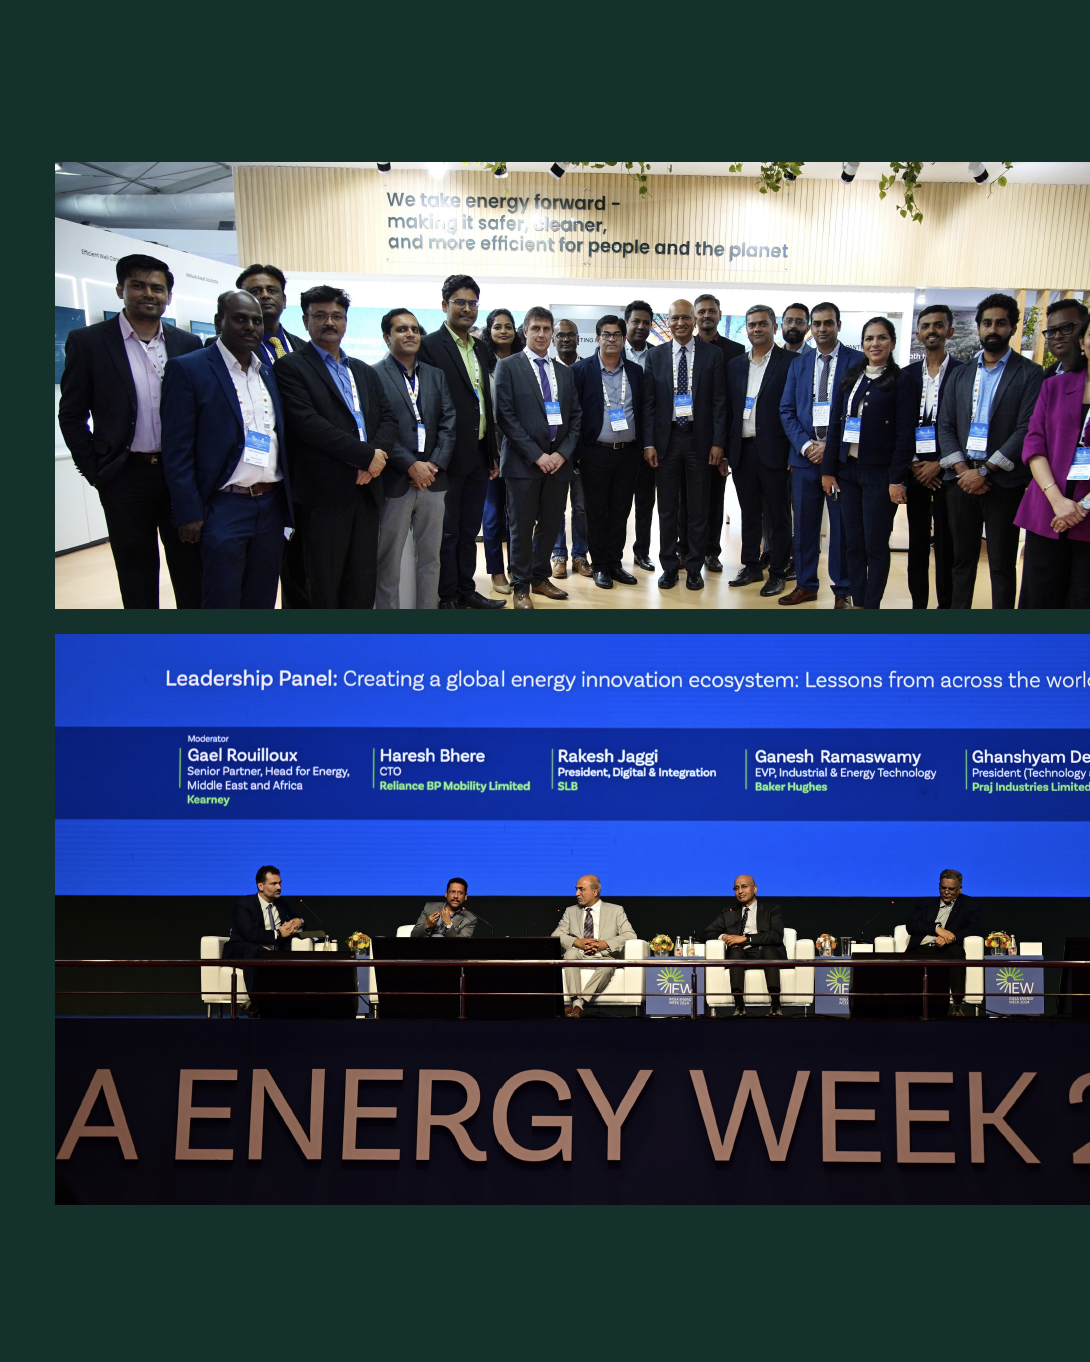 Two separate photo's from the event. The top image is people stood in a curved line for a group photo. The bottom image is people sat on stage at India Energy Week